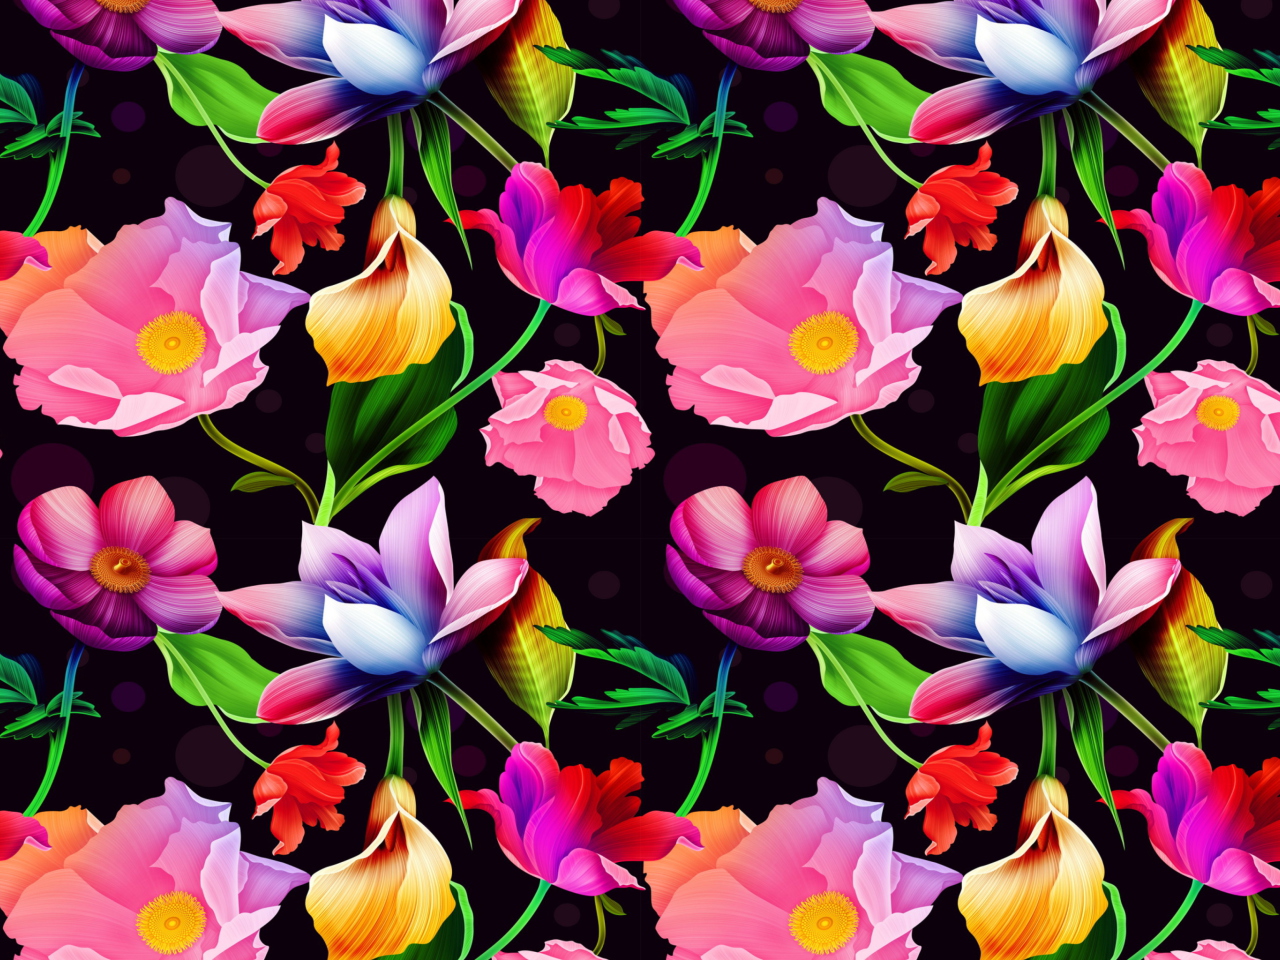 Colorful Flowers wallpaper 1280x960